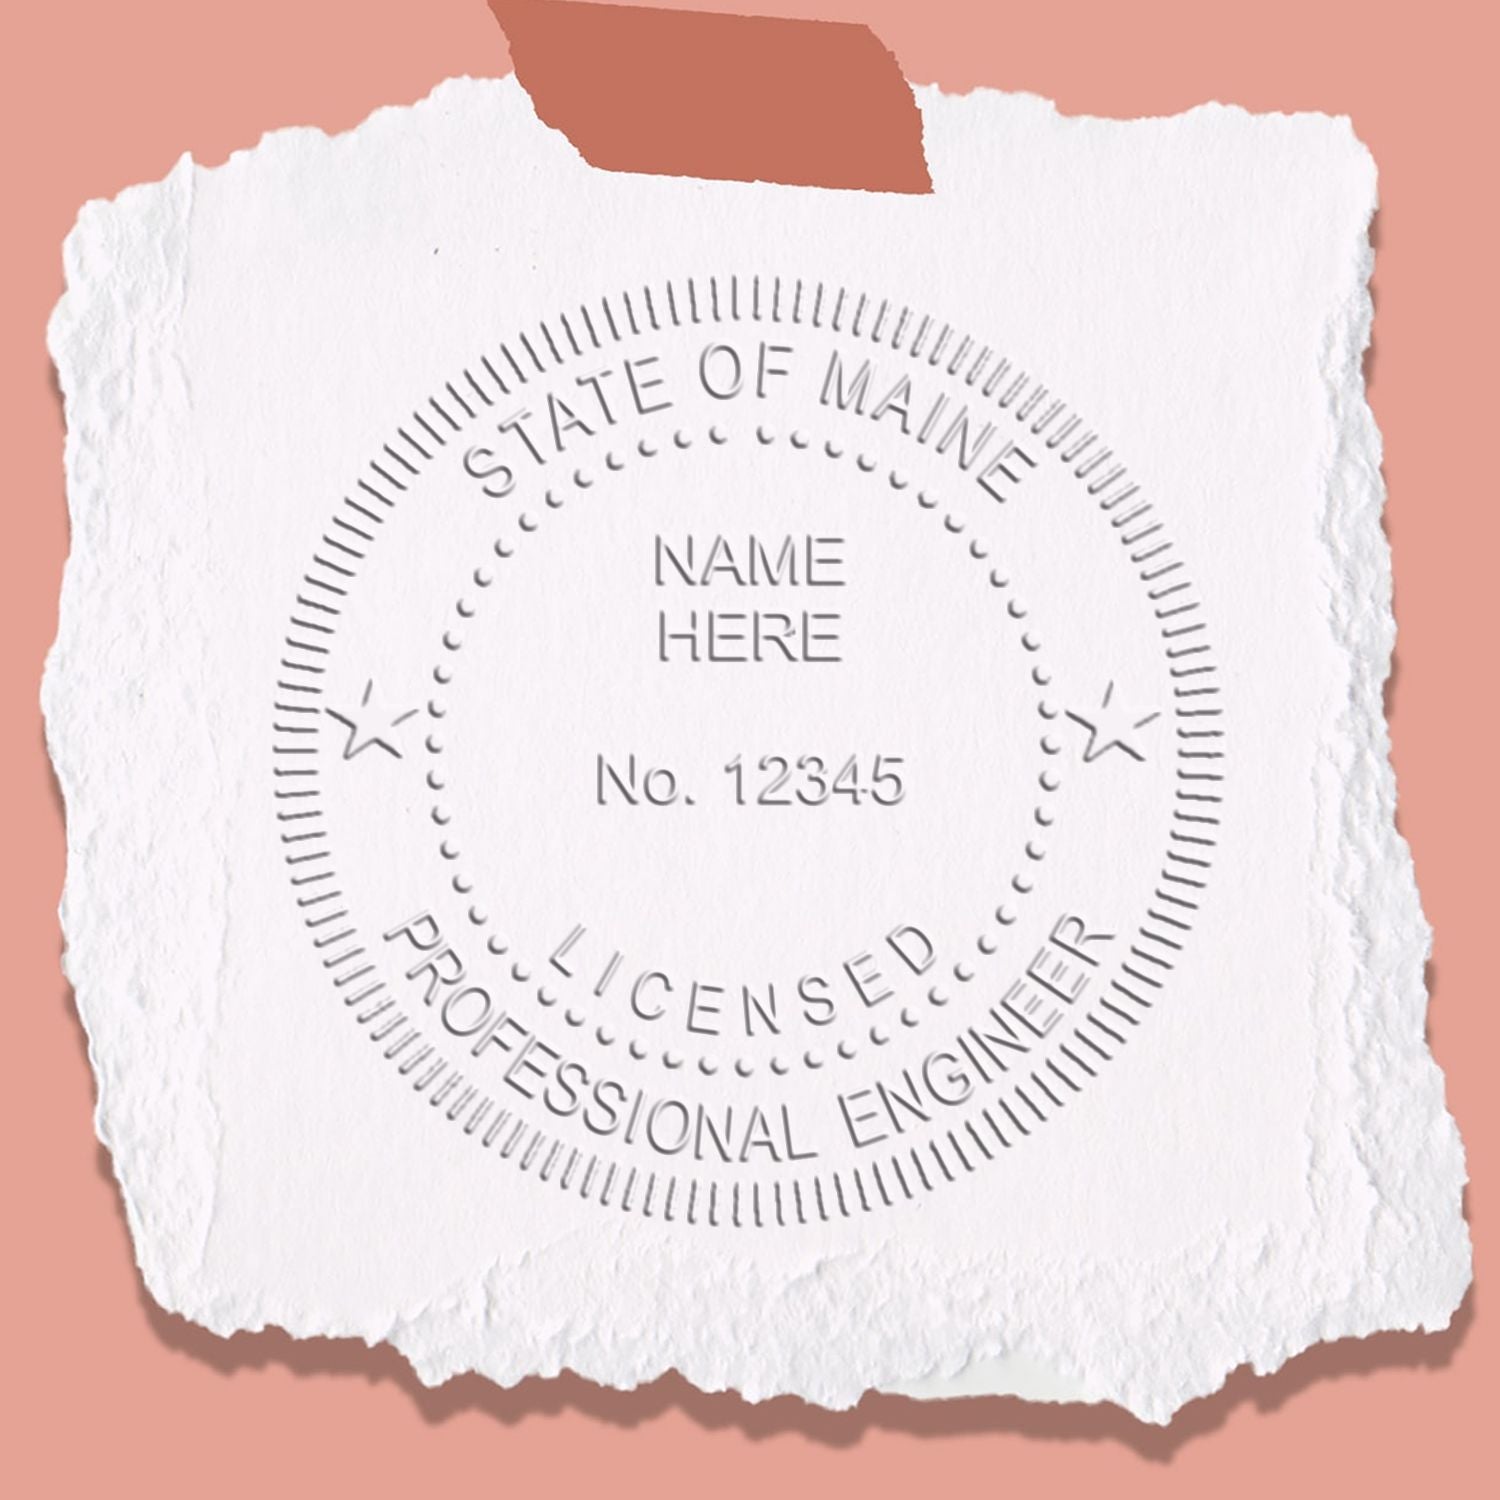 A photograph of the Soft Maine Professional Engineer Seal stamp impression reveals a vivid, professional image of the on paper.